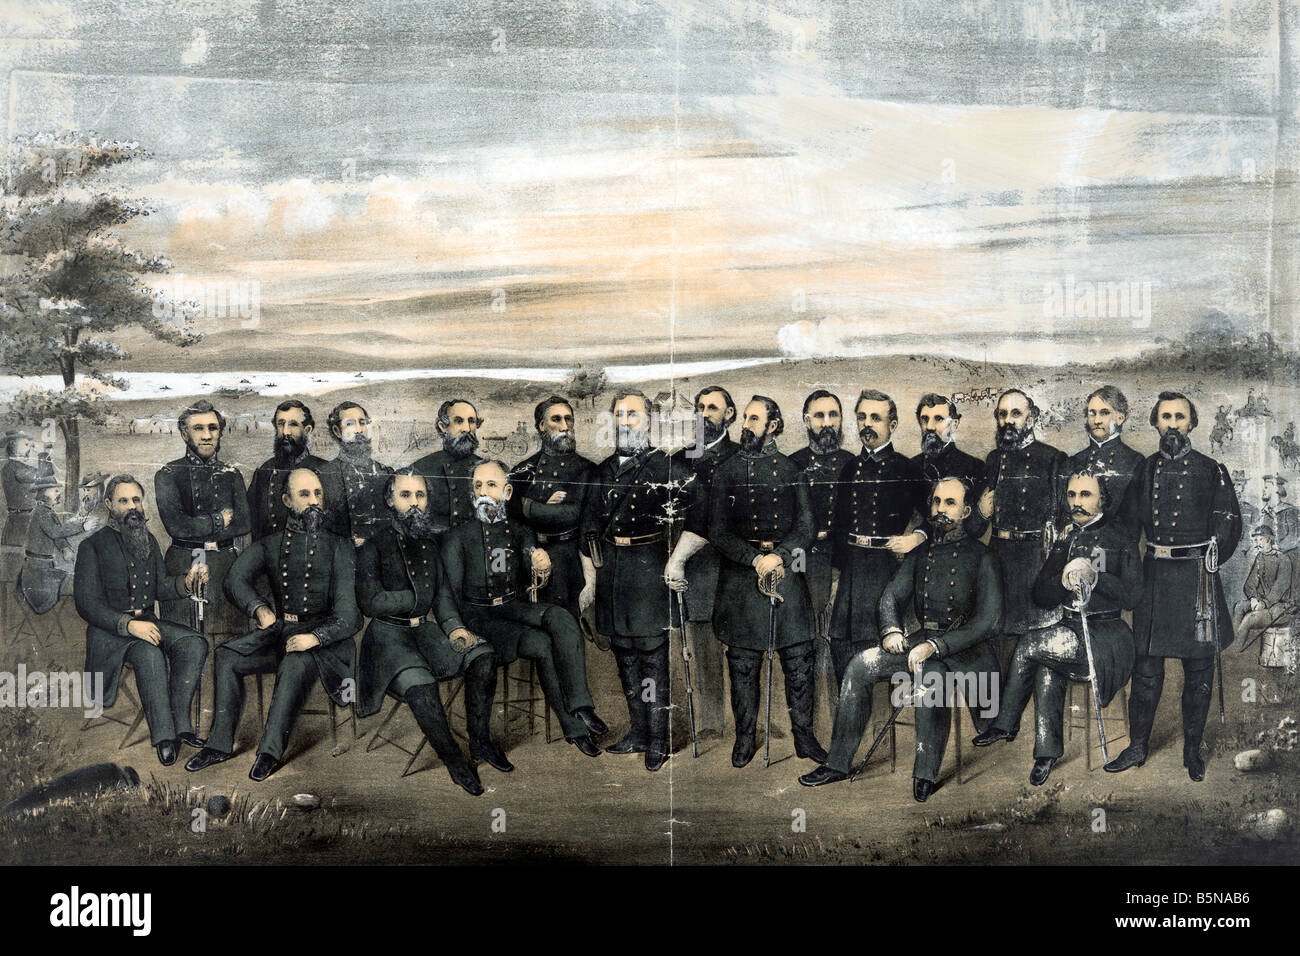 Art featuring Lee's Generals of the Confederate States of America in The USA Civil War 1861 - 1865 Stock Photo